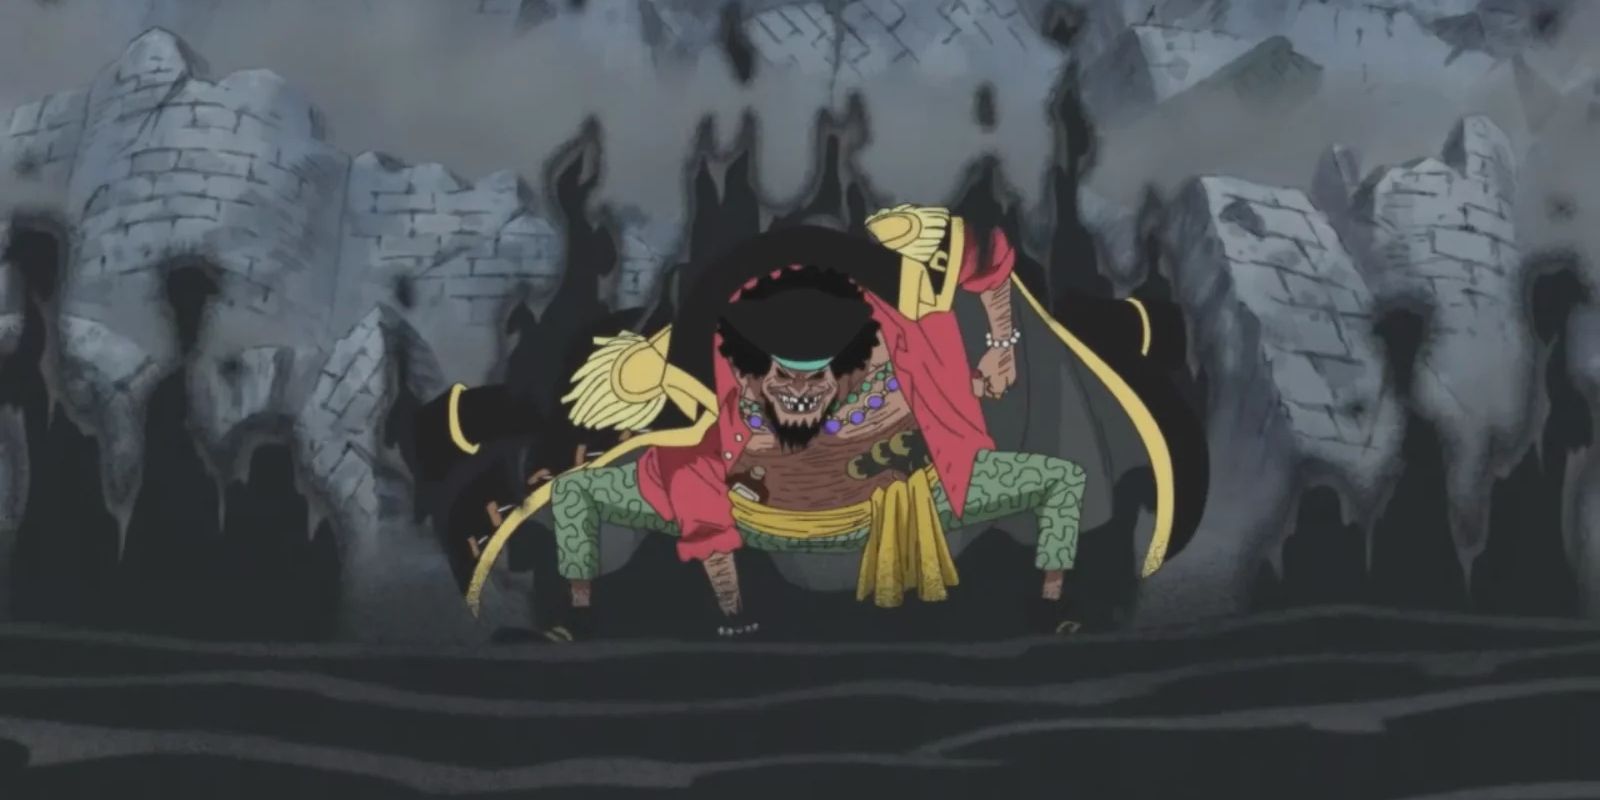 Screenshot from One Piece anime shows Blackbeard putting his hand into the ground and waves of darkness forming around him while a Marineford building crumbles behind him.